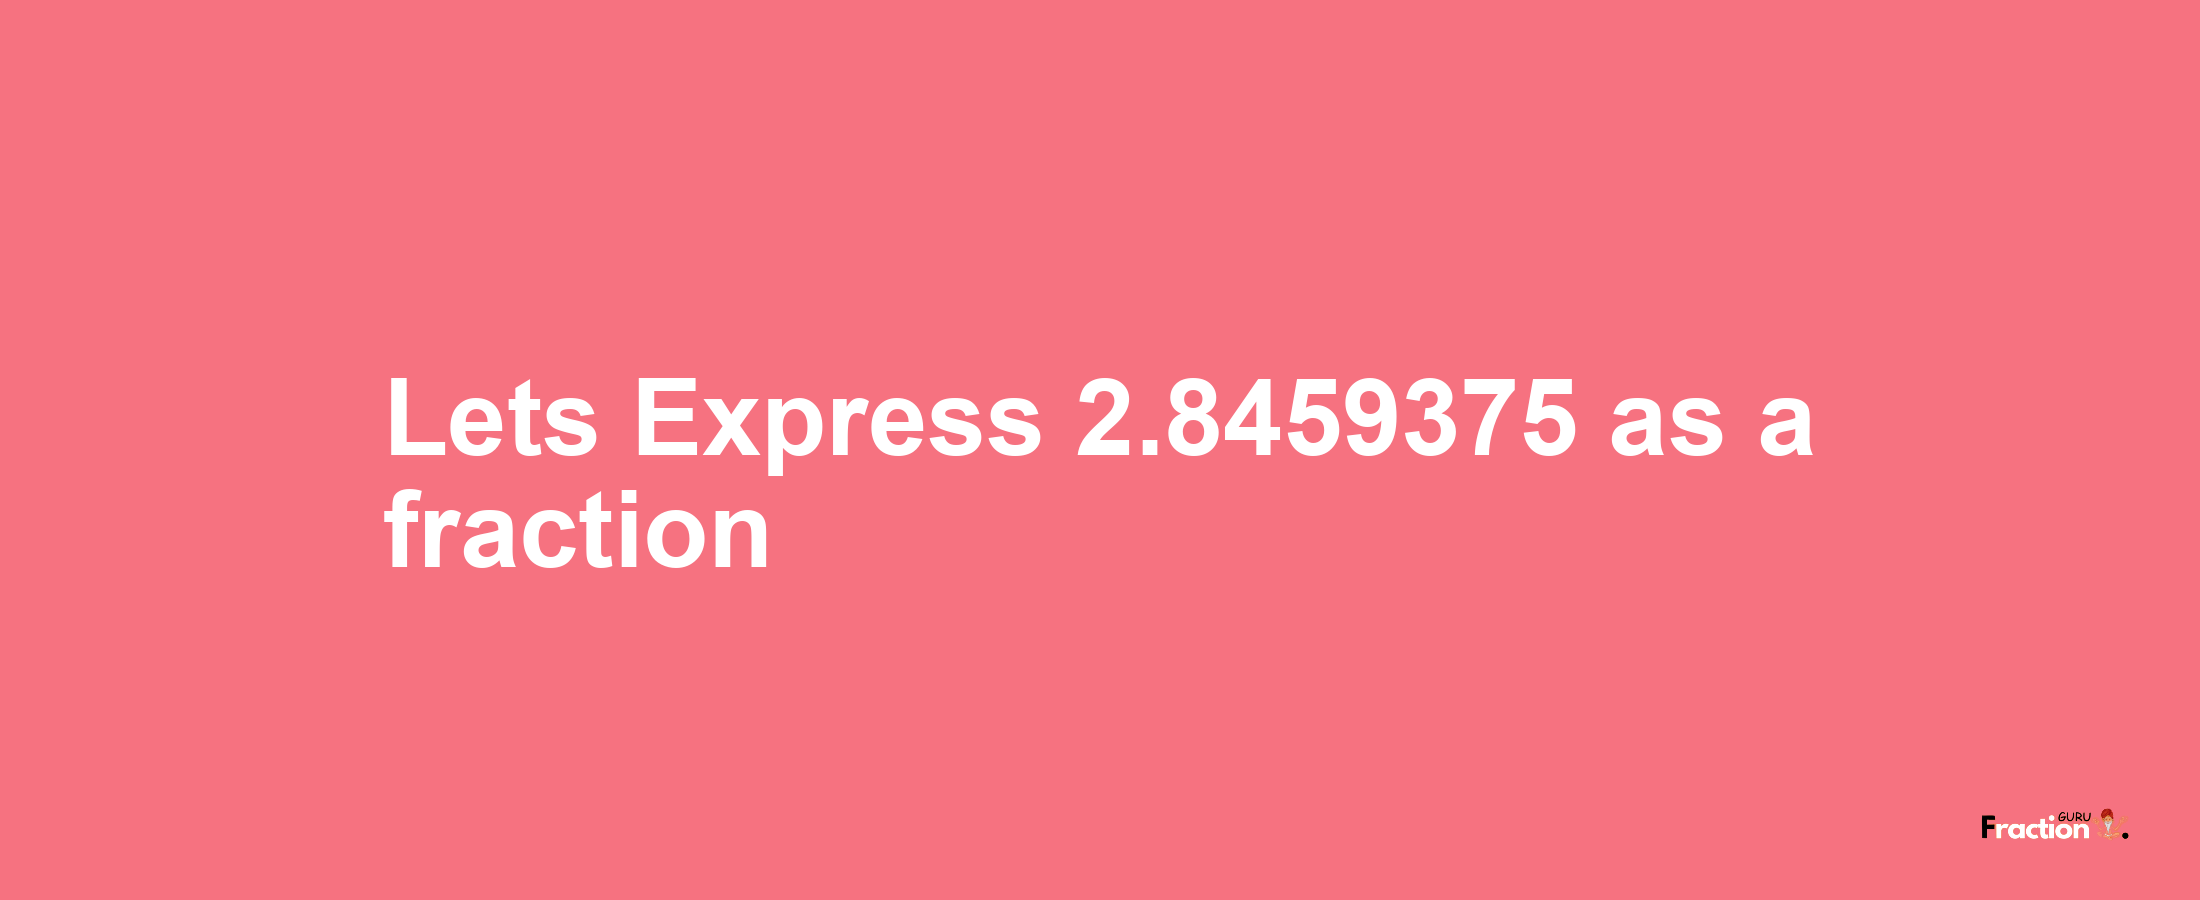 Lets Express 2.8459375 as afraction